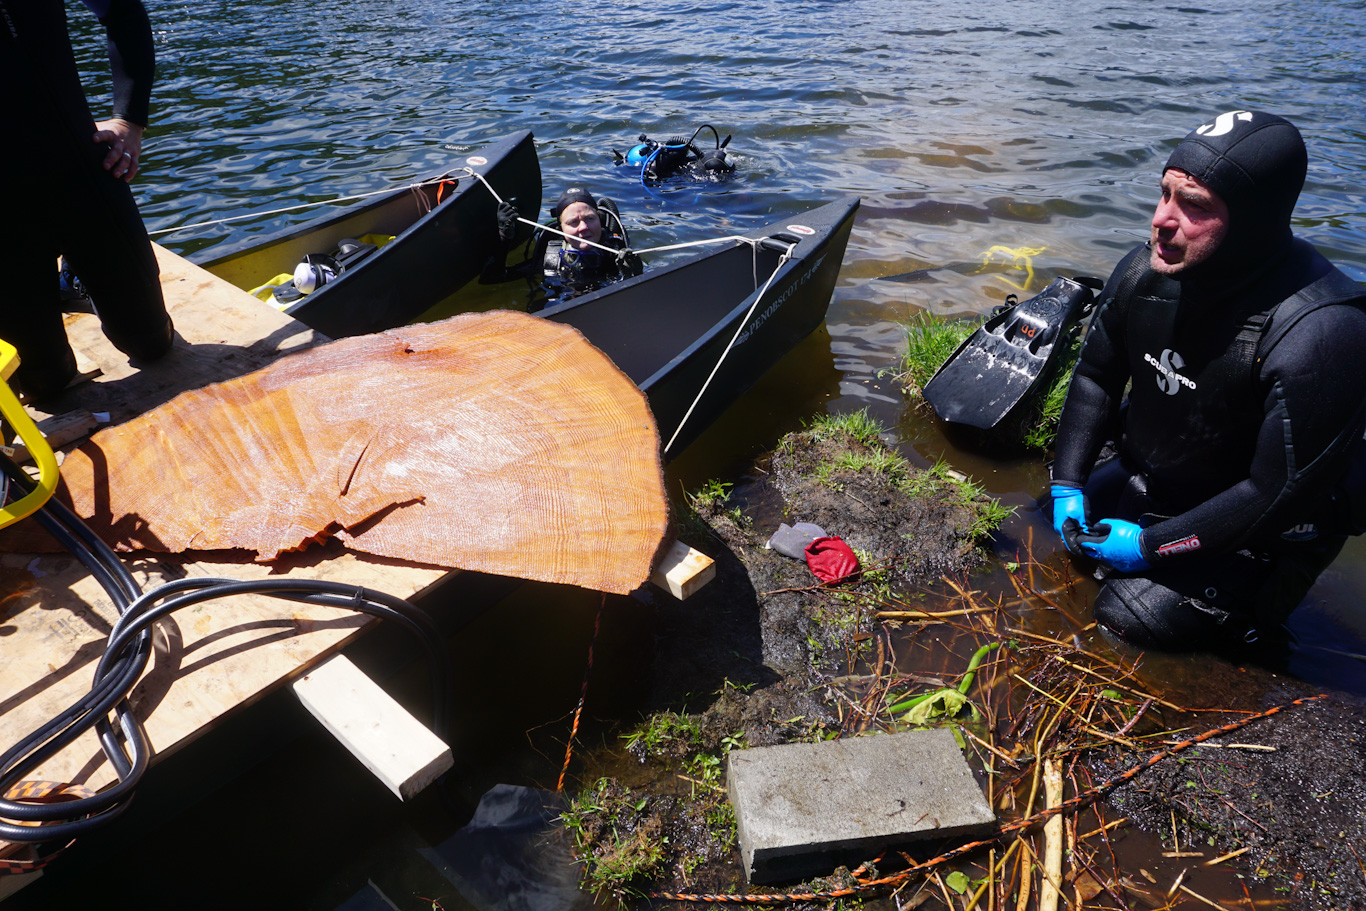 Divers bring to the surface a sample that they collected from an earthquake-killed tree in Price Lake, WA.